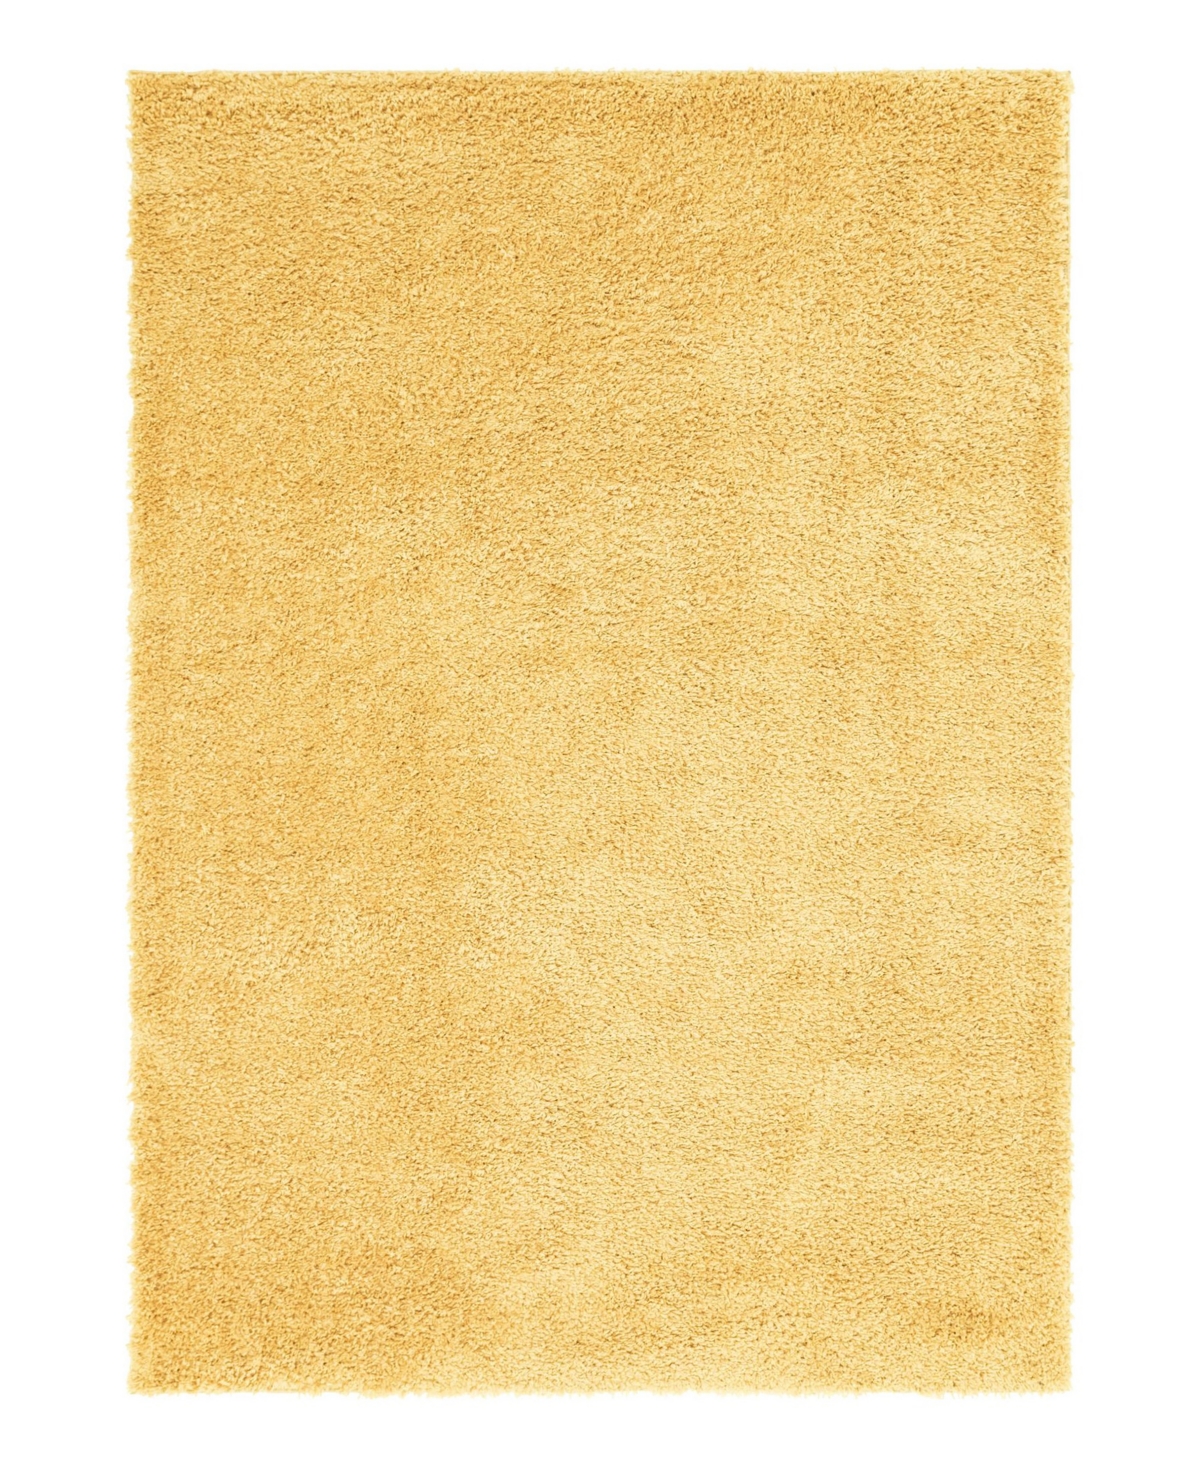 Bayshore Home Canton Shag Solid 7' X 10' Area Rug In Maize